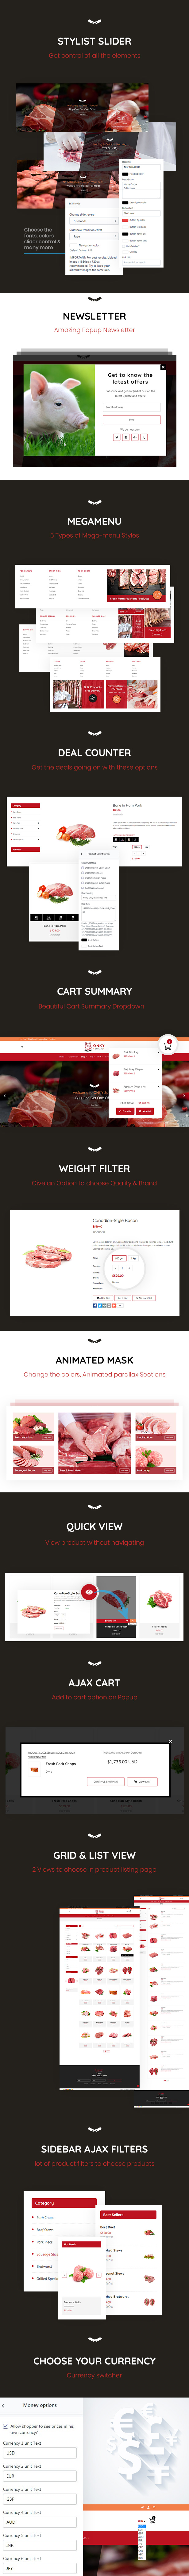 Onky | Pork, Chicken & Meat Store Shopify Theme - 2